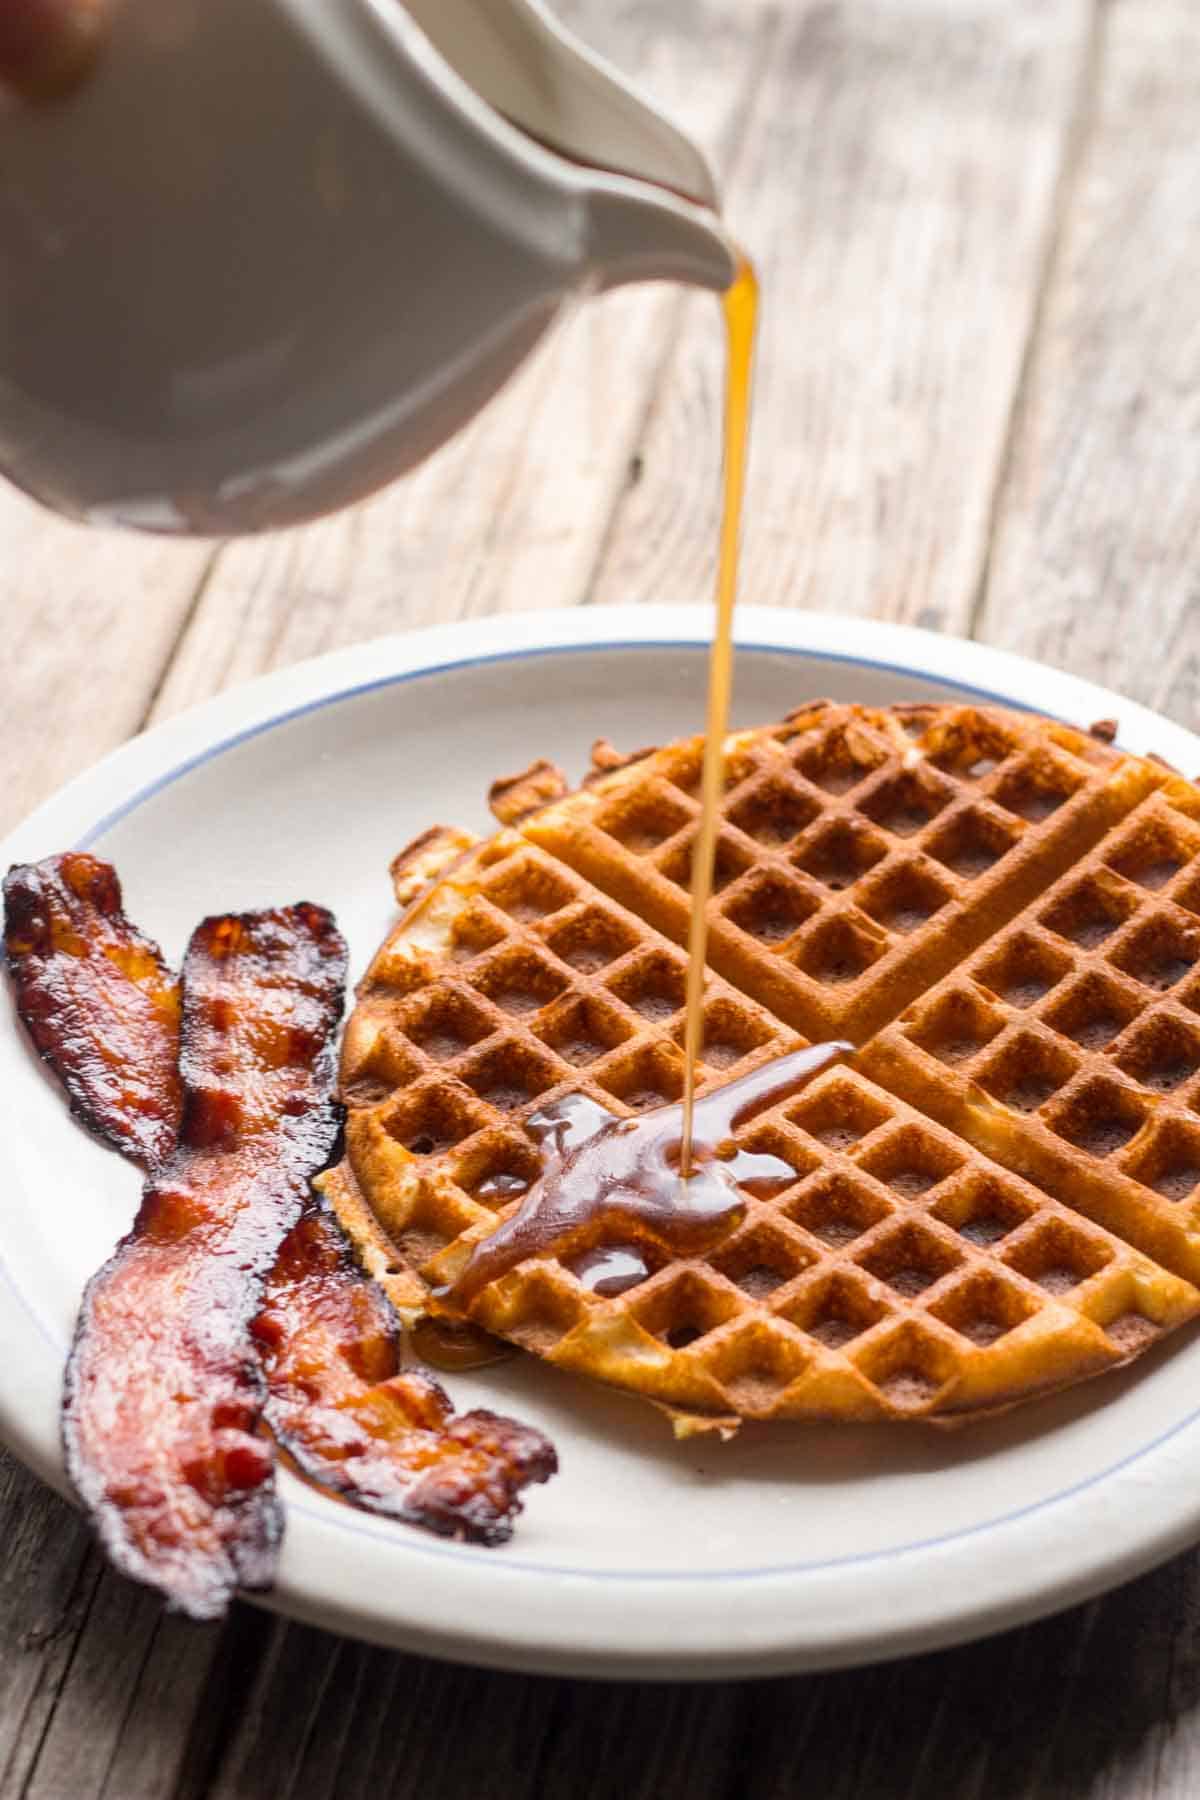 A plate with a waffle and bacon with maple syrup pouring out of a white cup.